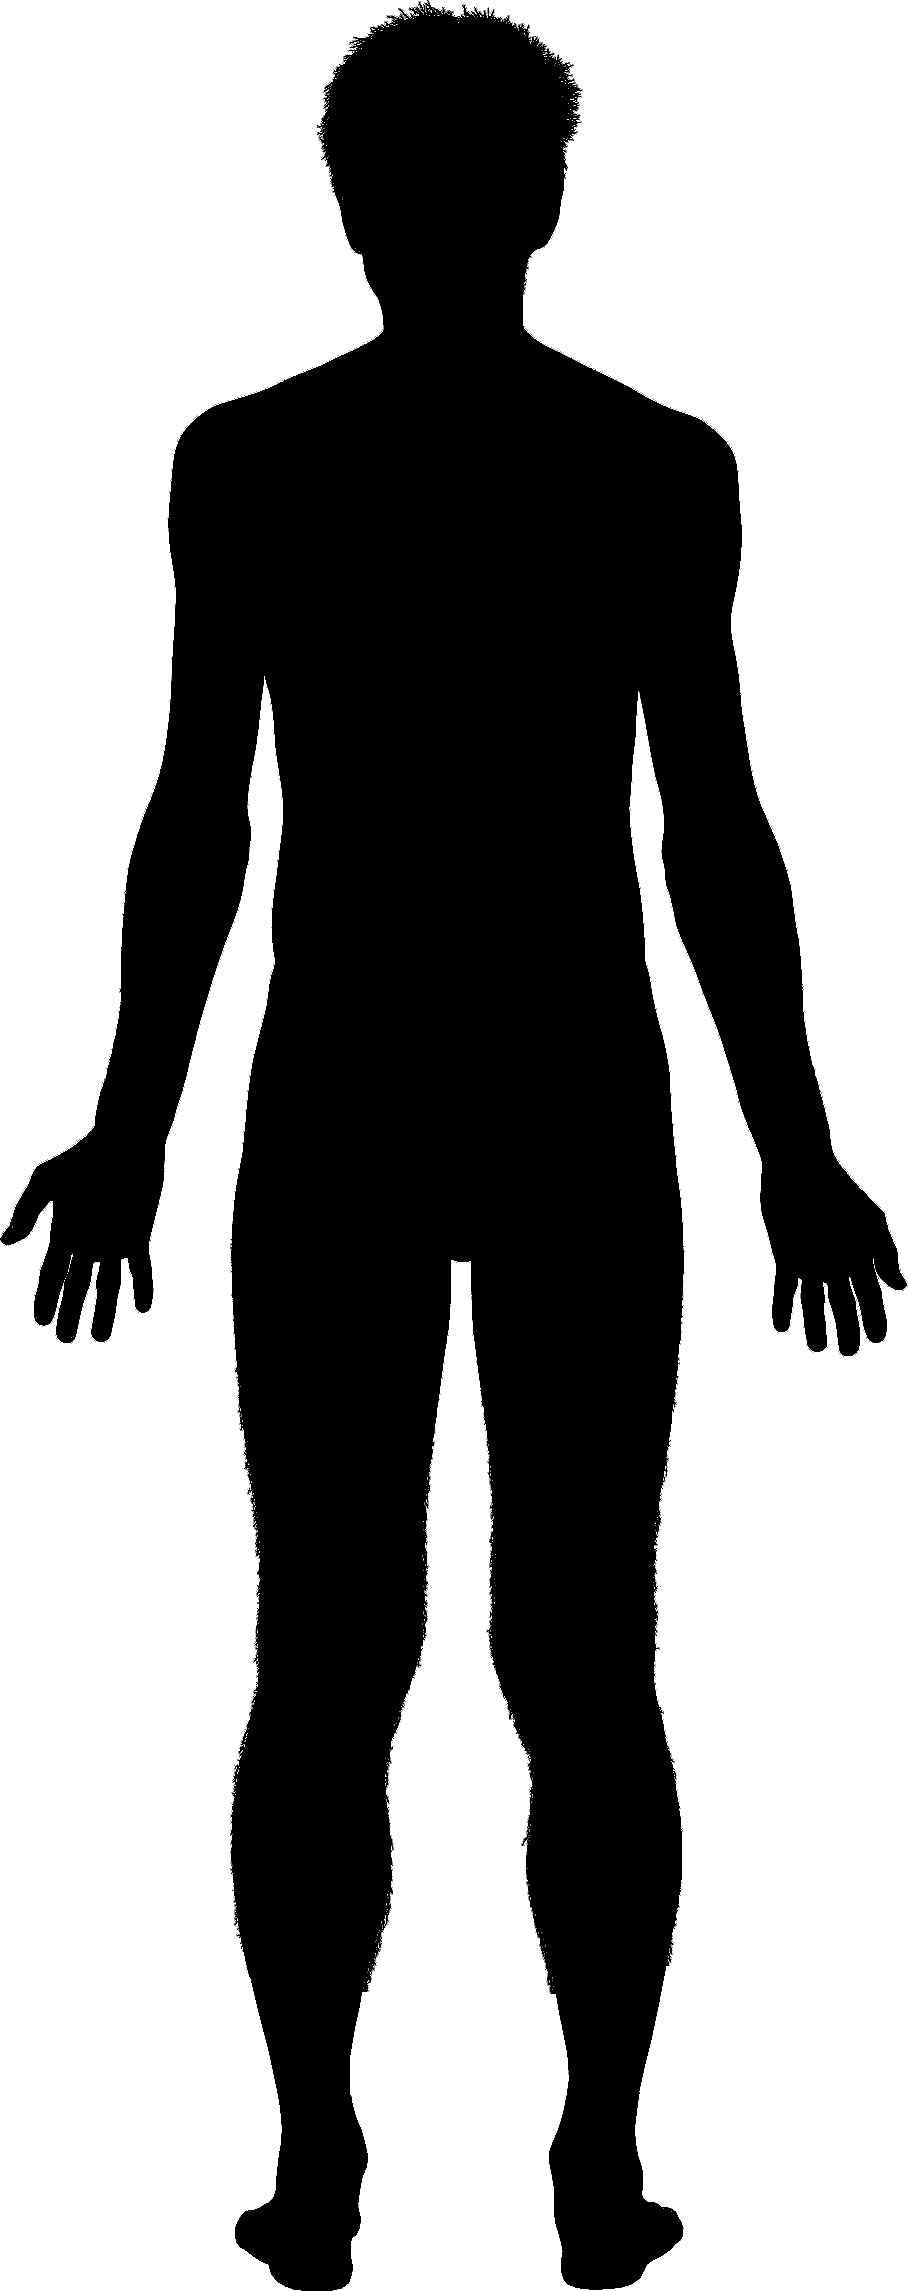 Female Body Outline Drawing - Clipart library - Clipart library